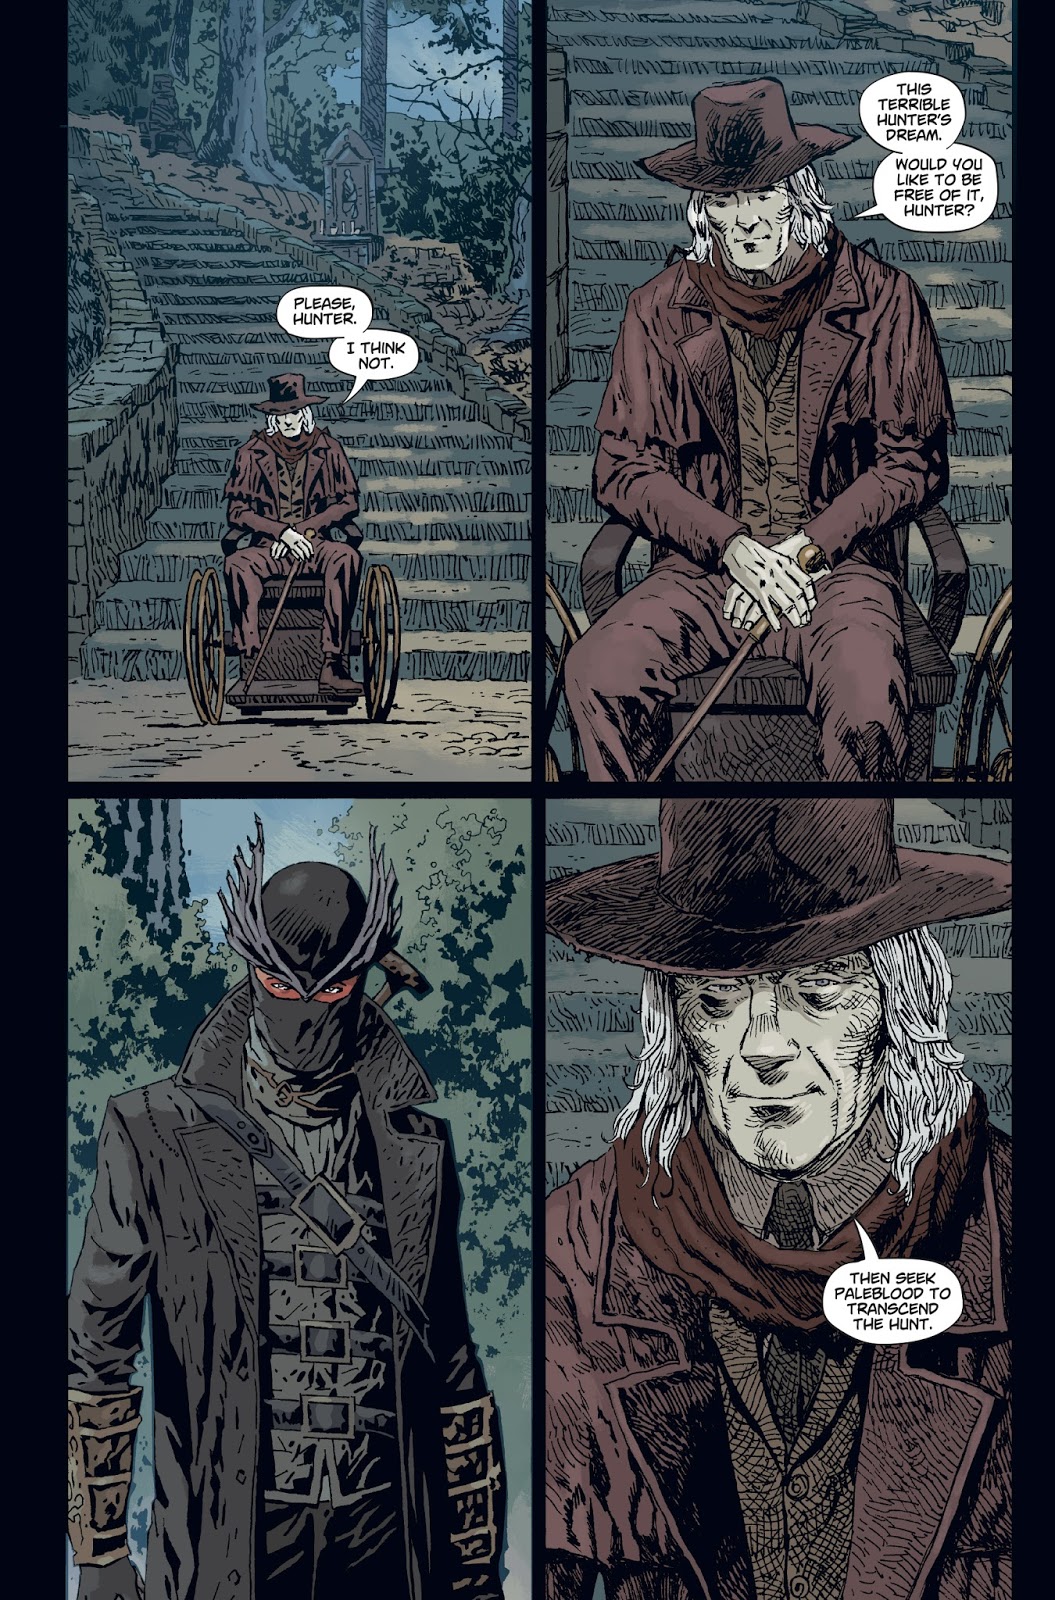 New Bloodborne Comic Series Announced; First Issue Releases